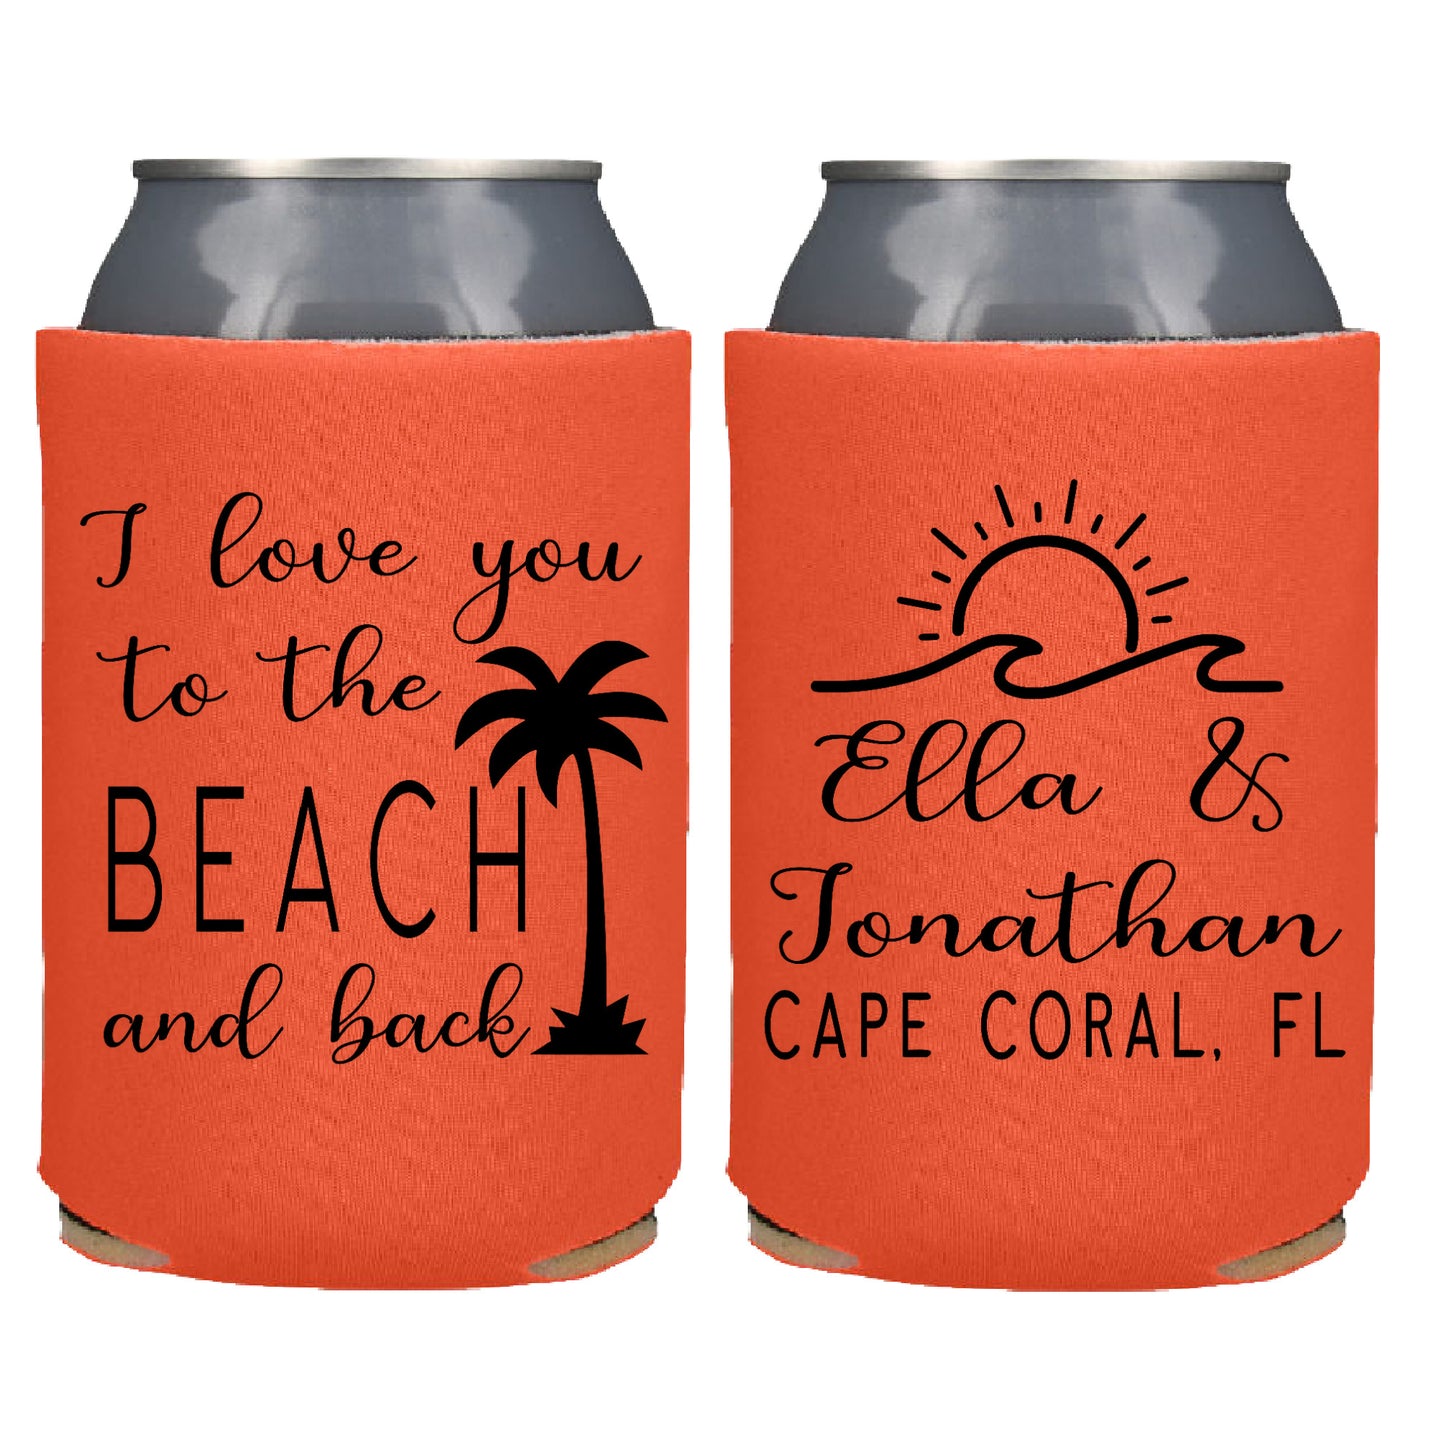 I Love You to the Beach and Back Destination Wedding Favor Screen Printed Can Cooler